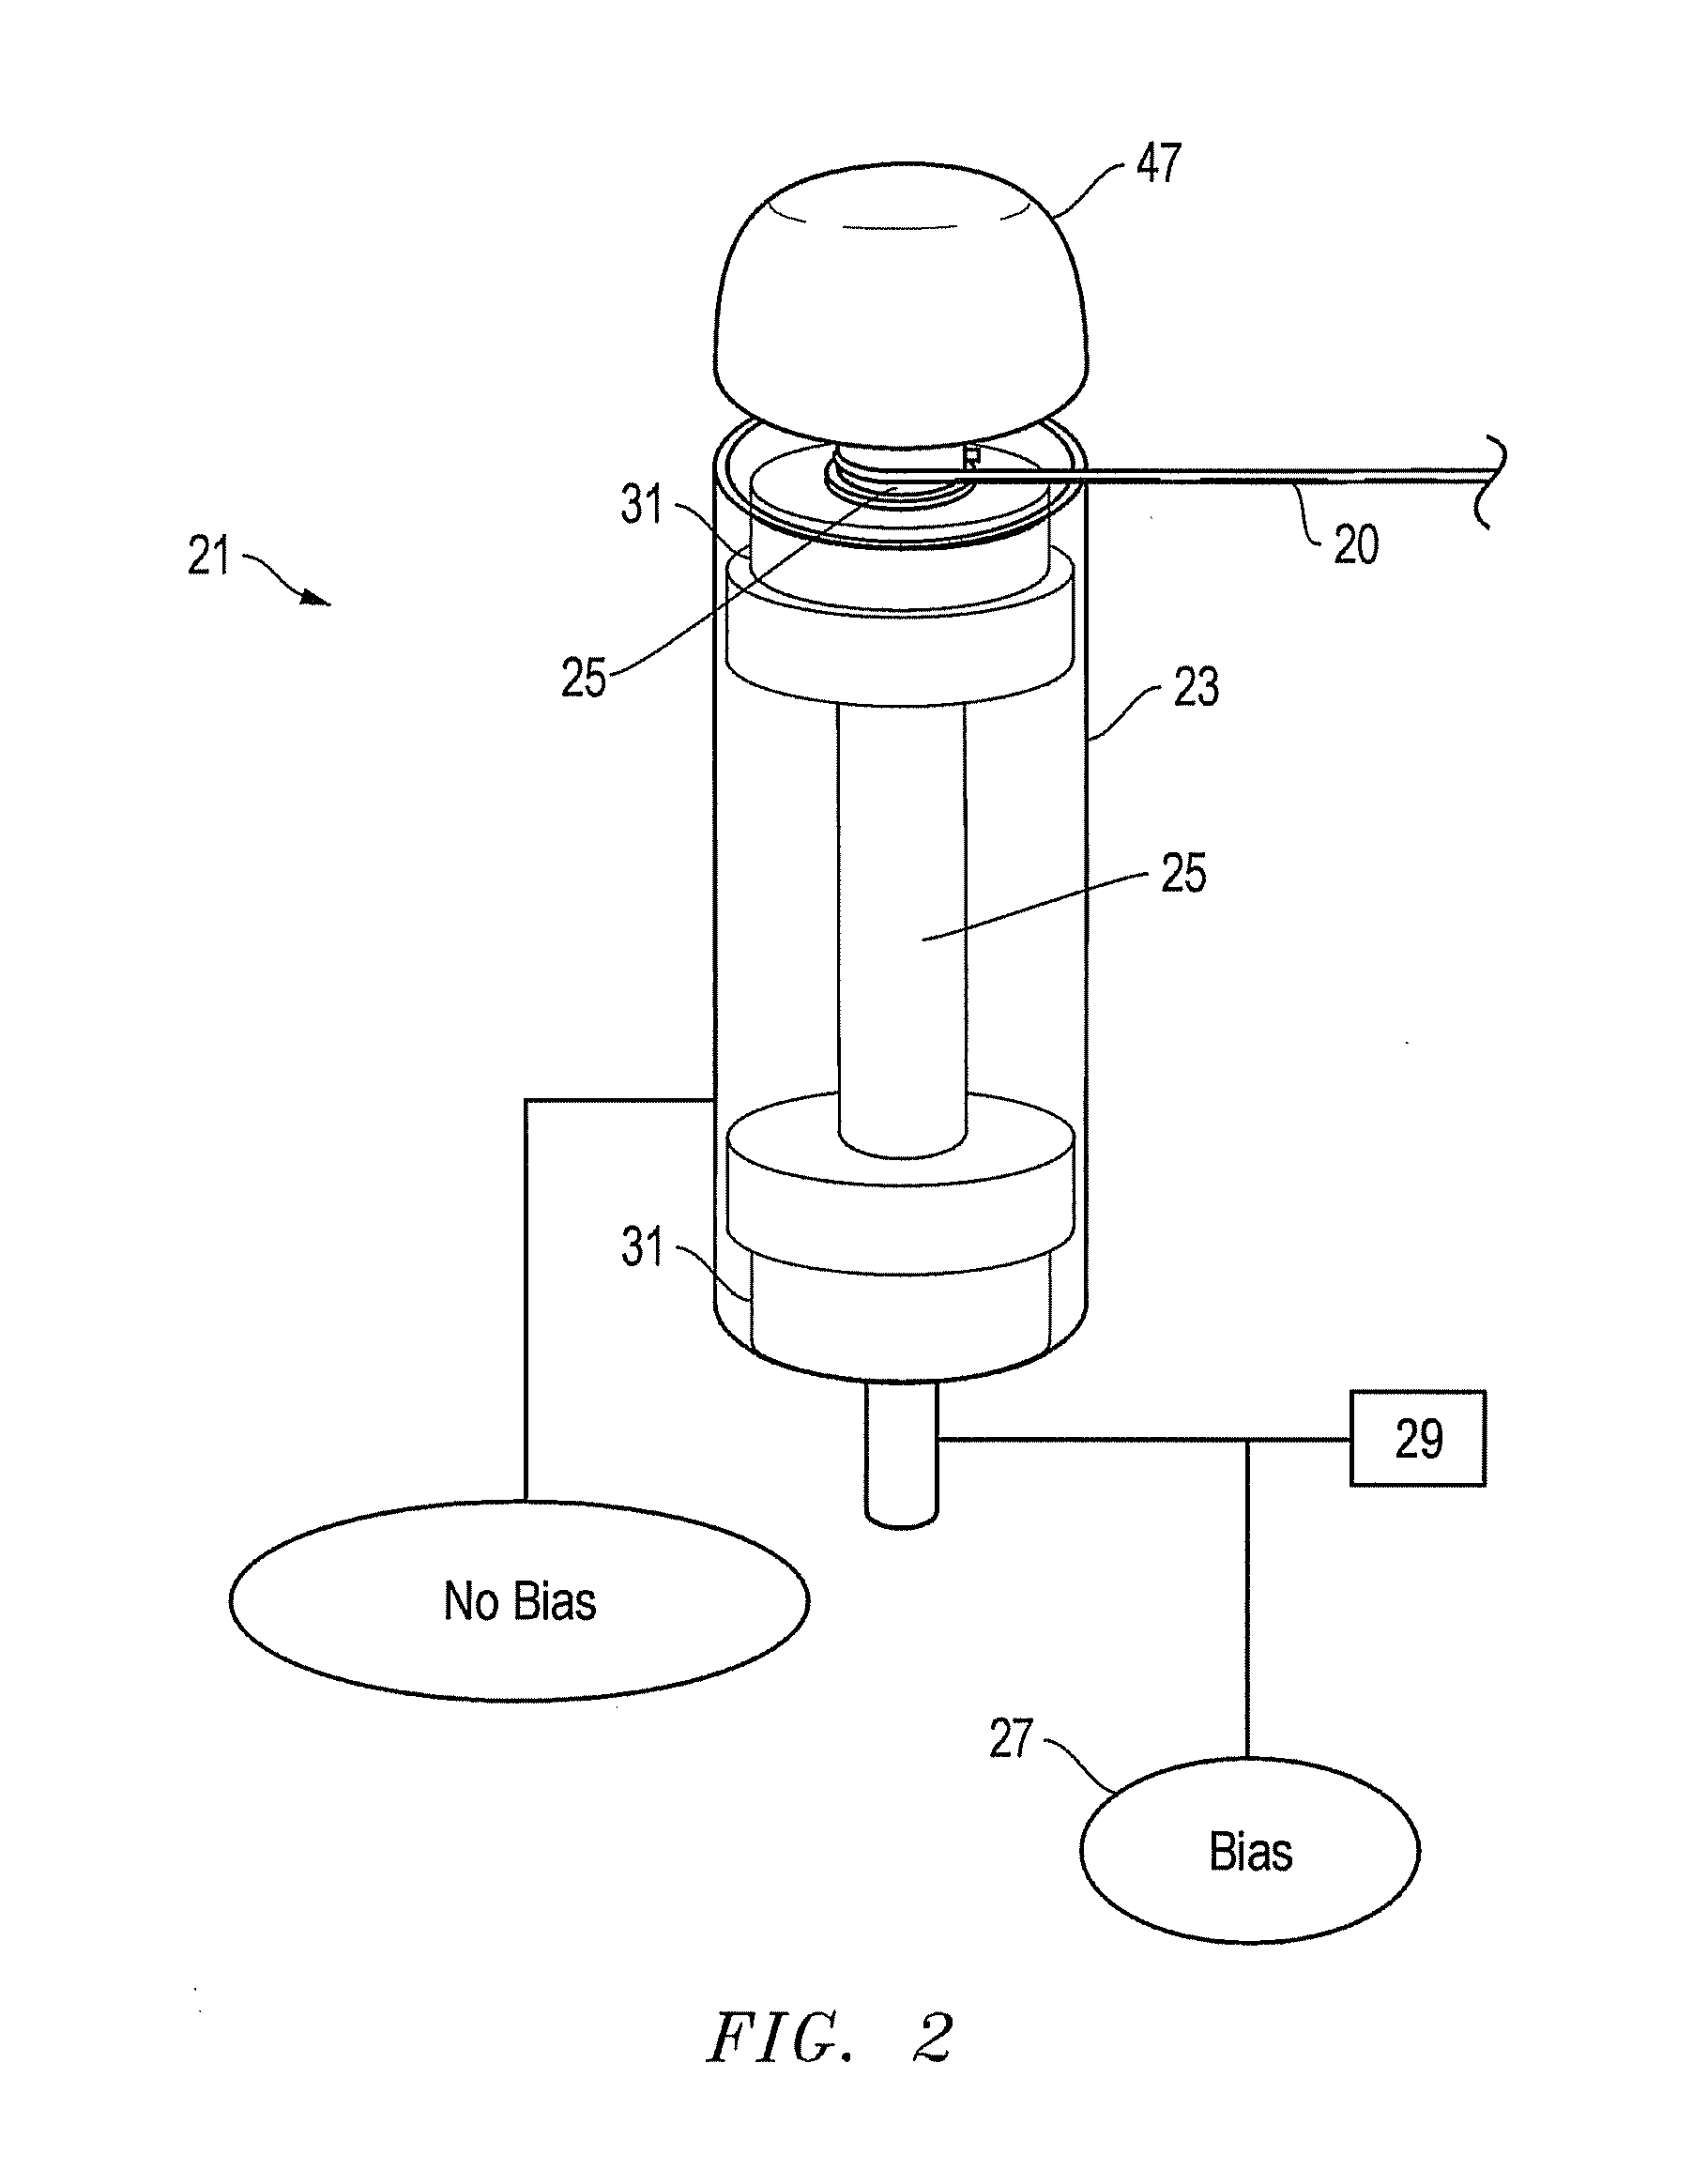 System, method and apparatus for filament and support used in plasma-enhanced chemical vapor deposition for reducing carbon voids on media disks in disk drives